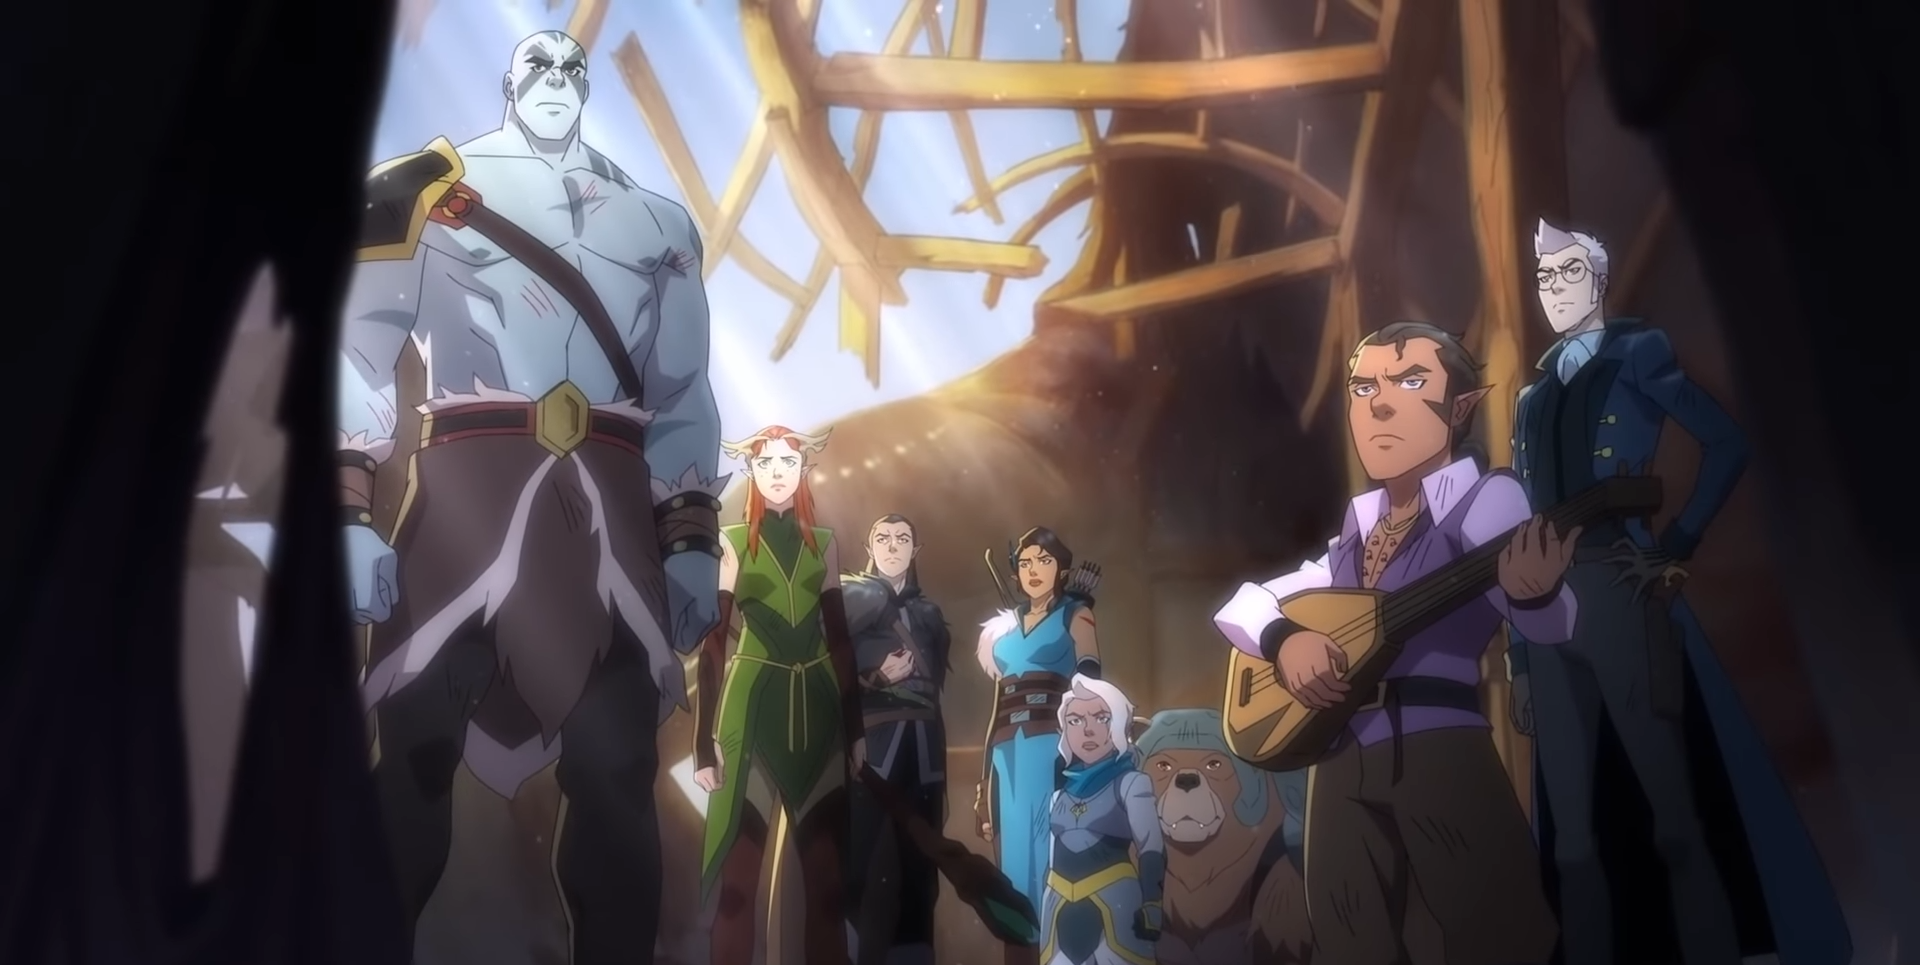 Legend of Vox Machina Premiere Date on Amazon Prime Video Announced   Variety